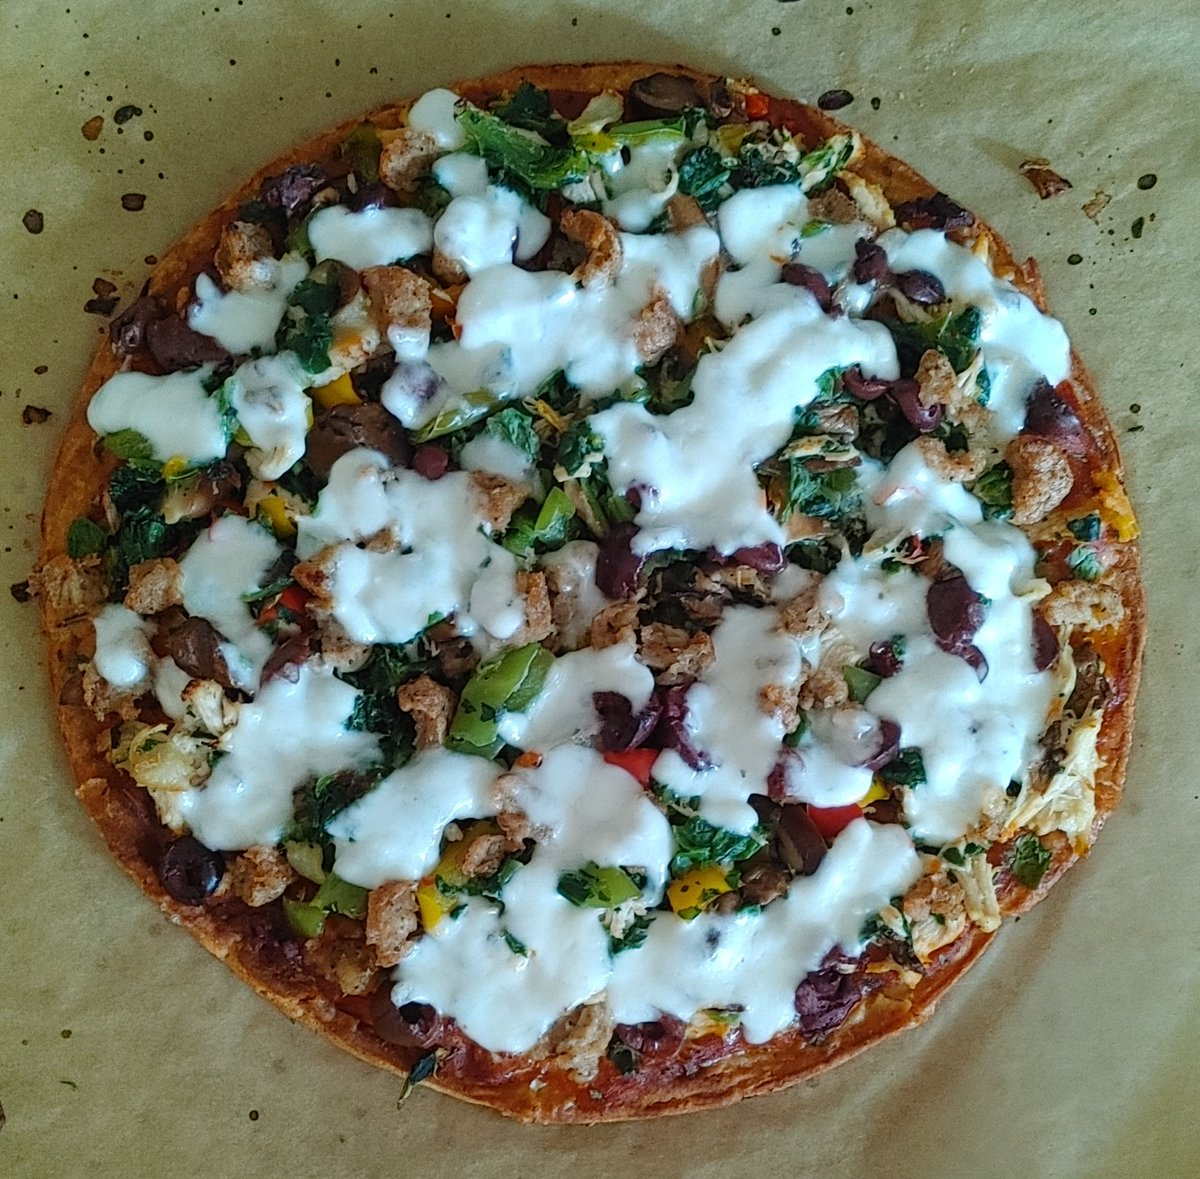 I really enjoy making a #glutenfree #cauliflowercrust #homemade #pizza. I topped it with all #organic #vegetables, #olives, shredded #chicken, chicken #sausage and topped with organic #pastureraised #buffalomozzarella #cheese.
#Lunch is served! #Healthier can taste great!